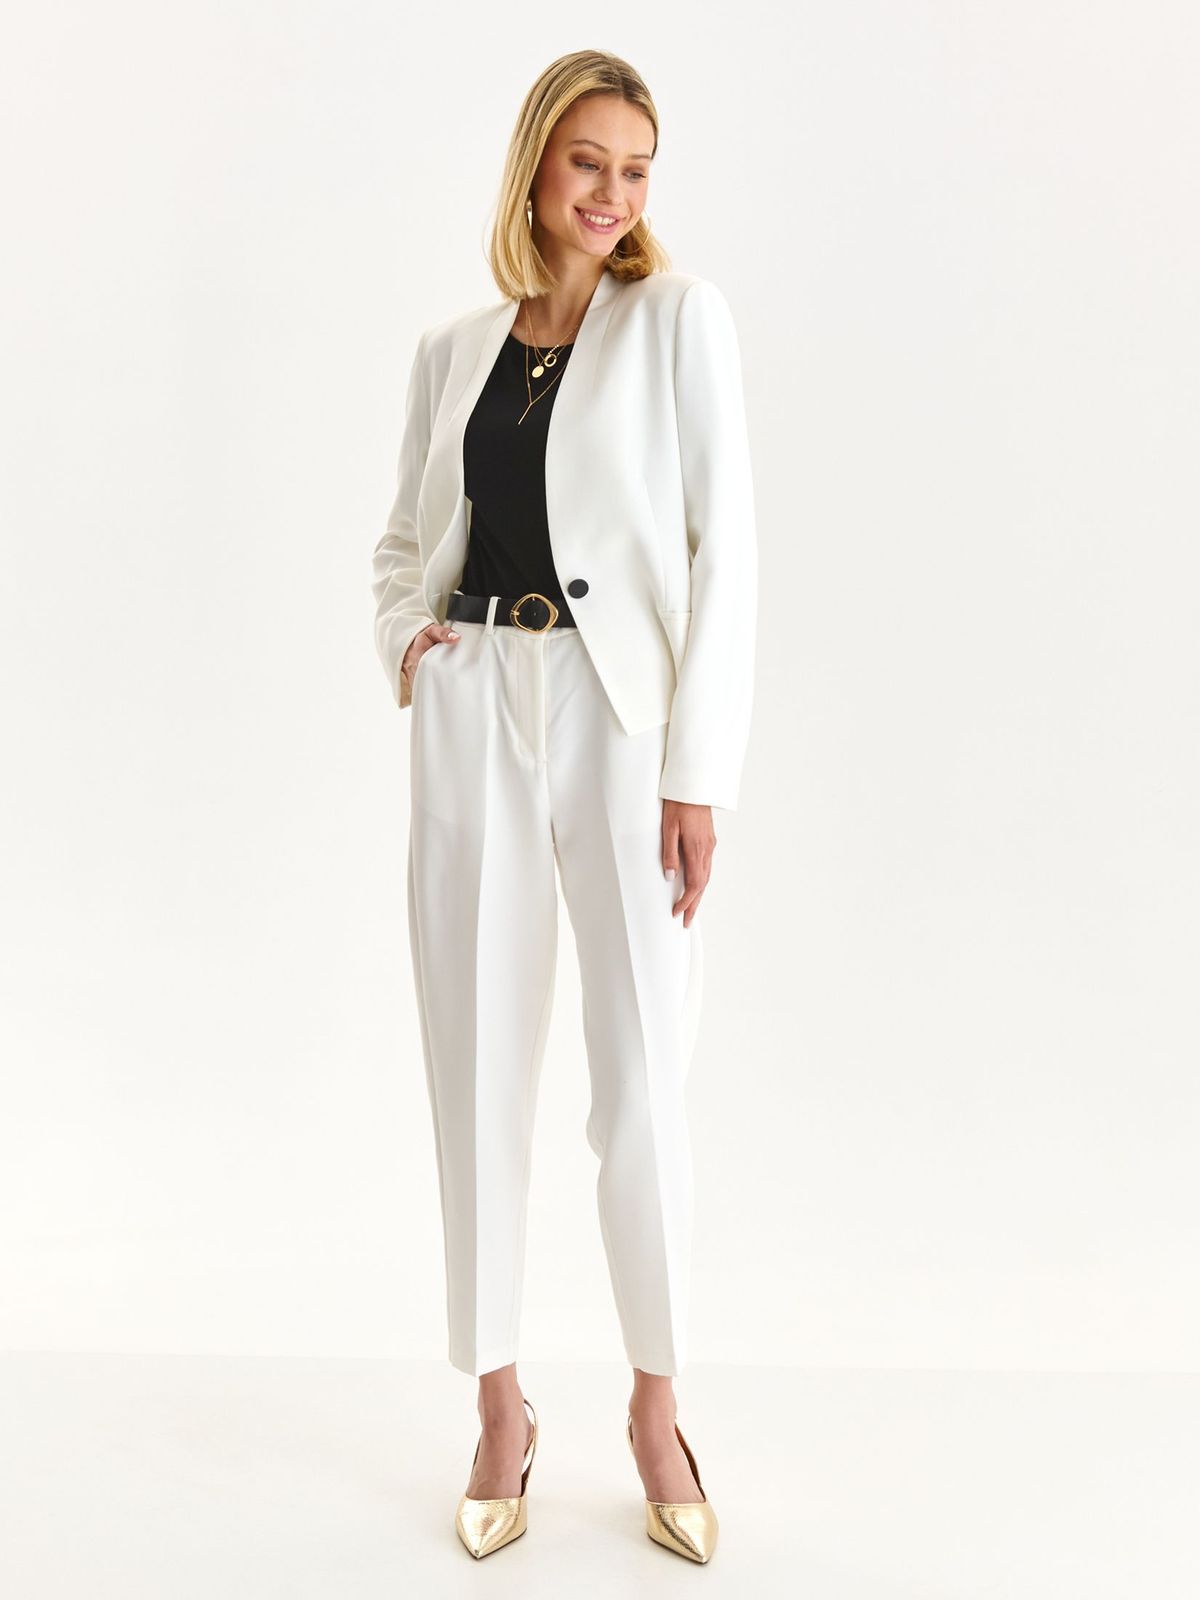 White trousers slightly elastic fabric high waisted conical